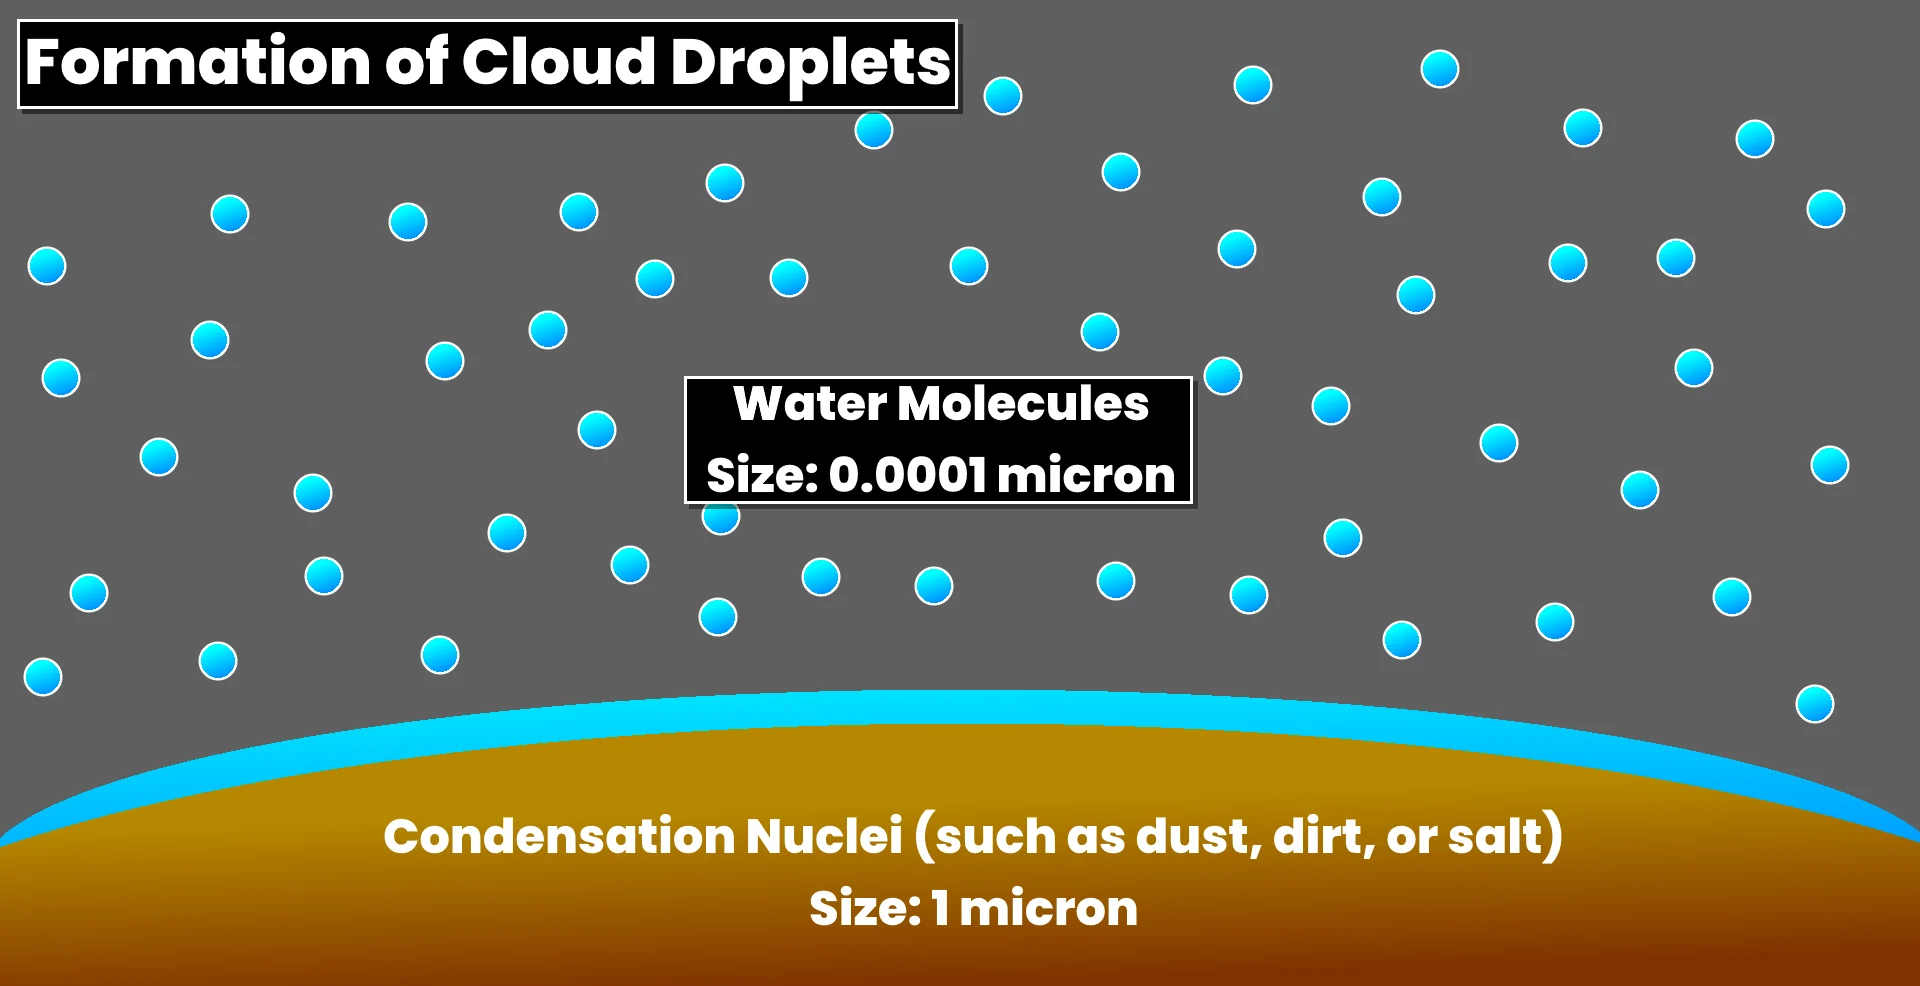 formation of cloud droplets diagram (by dennis)